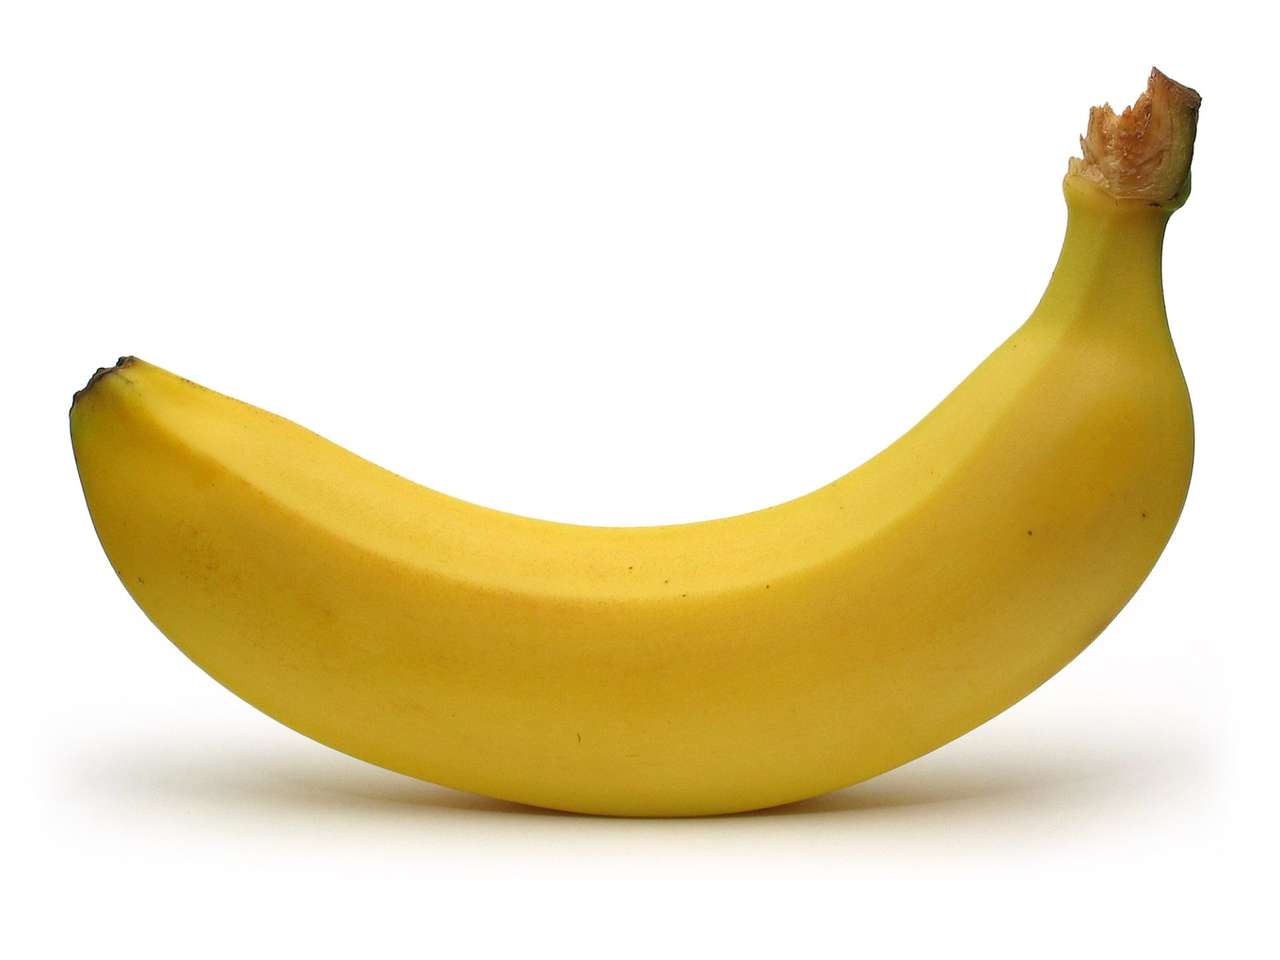 Banana Puzzle puzzle online from photo